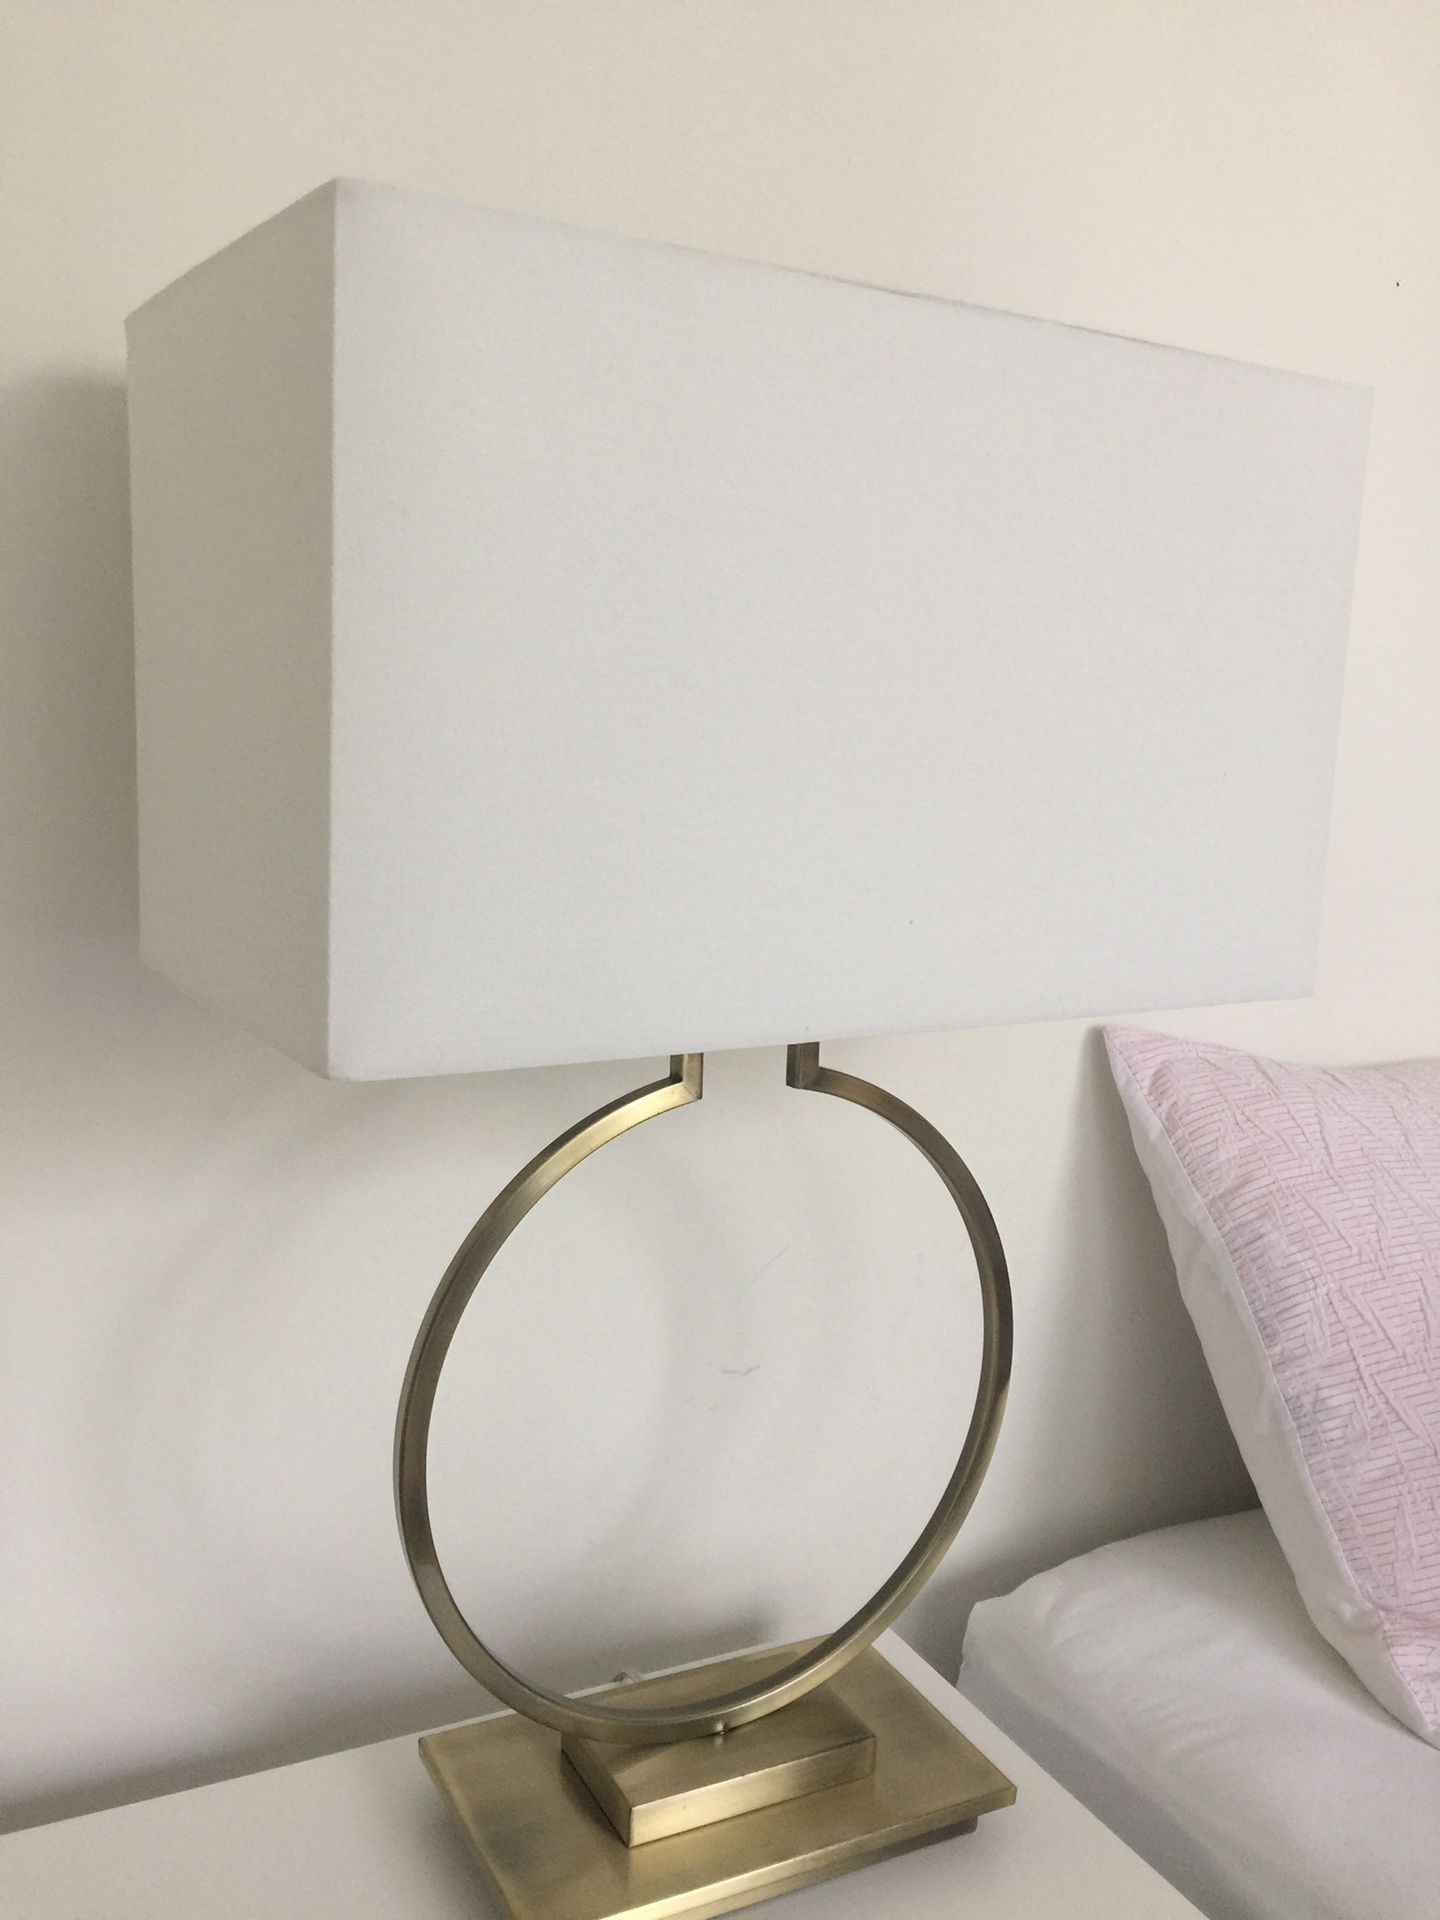 Pair of Lamps - Burnished Gold with white Rectangle Shade